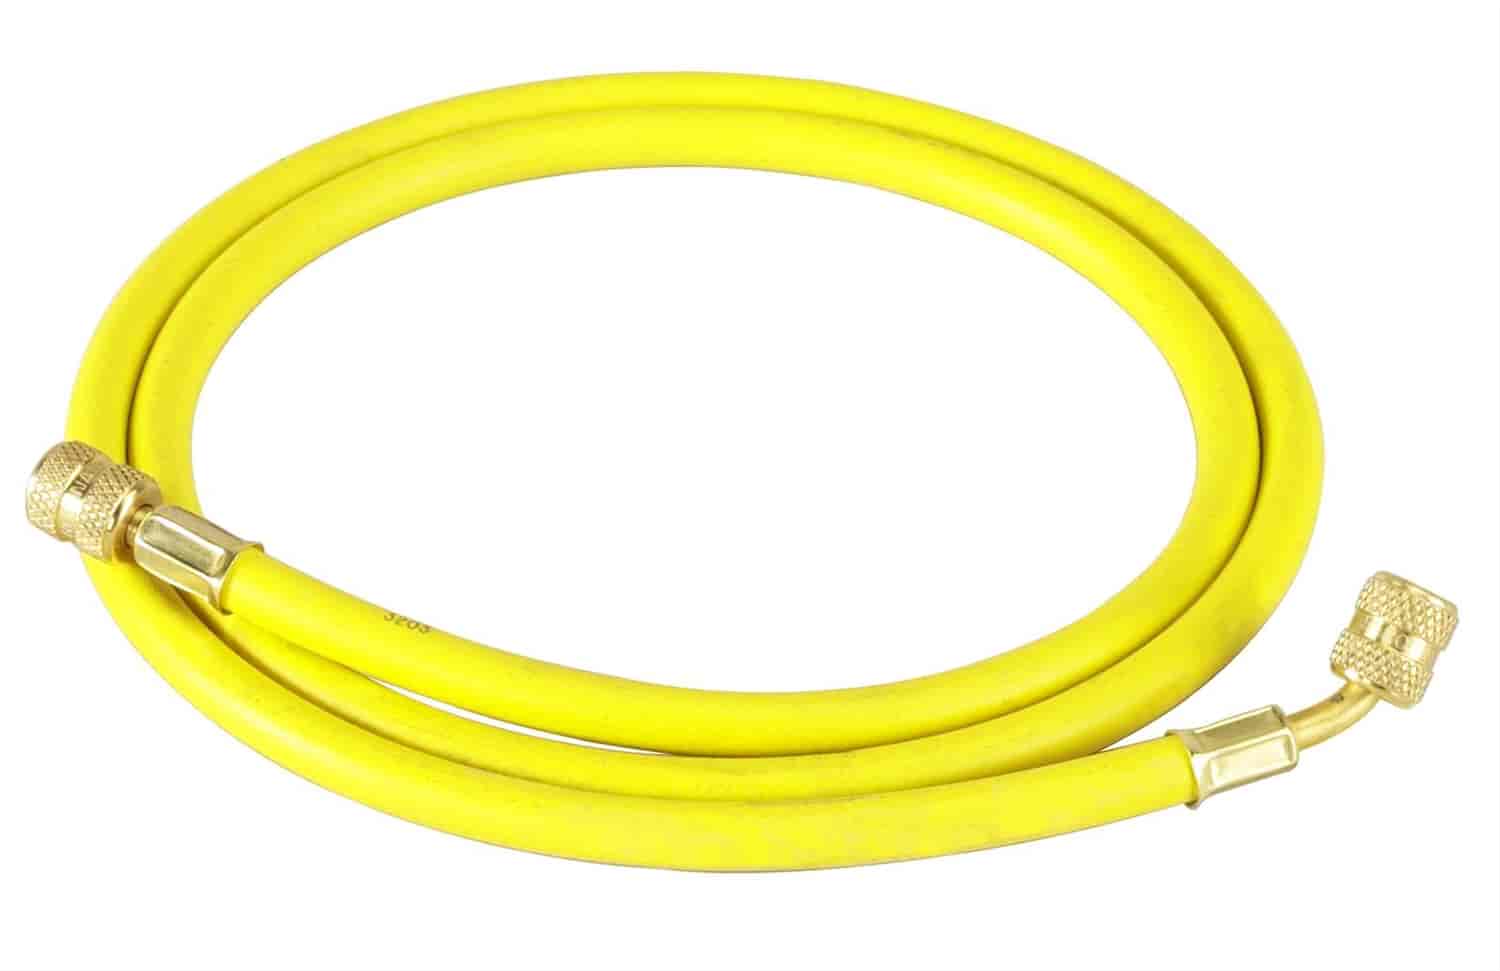 31060 Robinair Refrigerant Charging Hose, 60 in. Yellow Hose [1/4 in. x 1/4 in.]